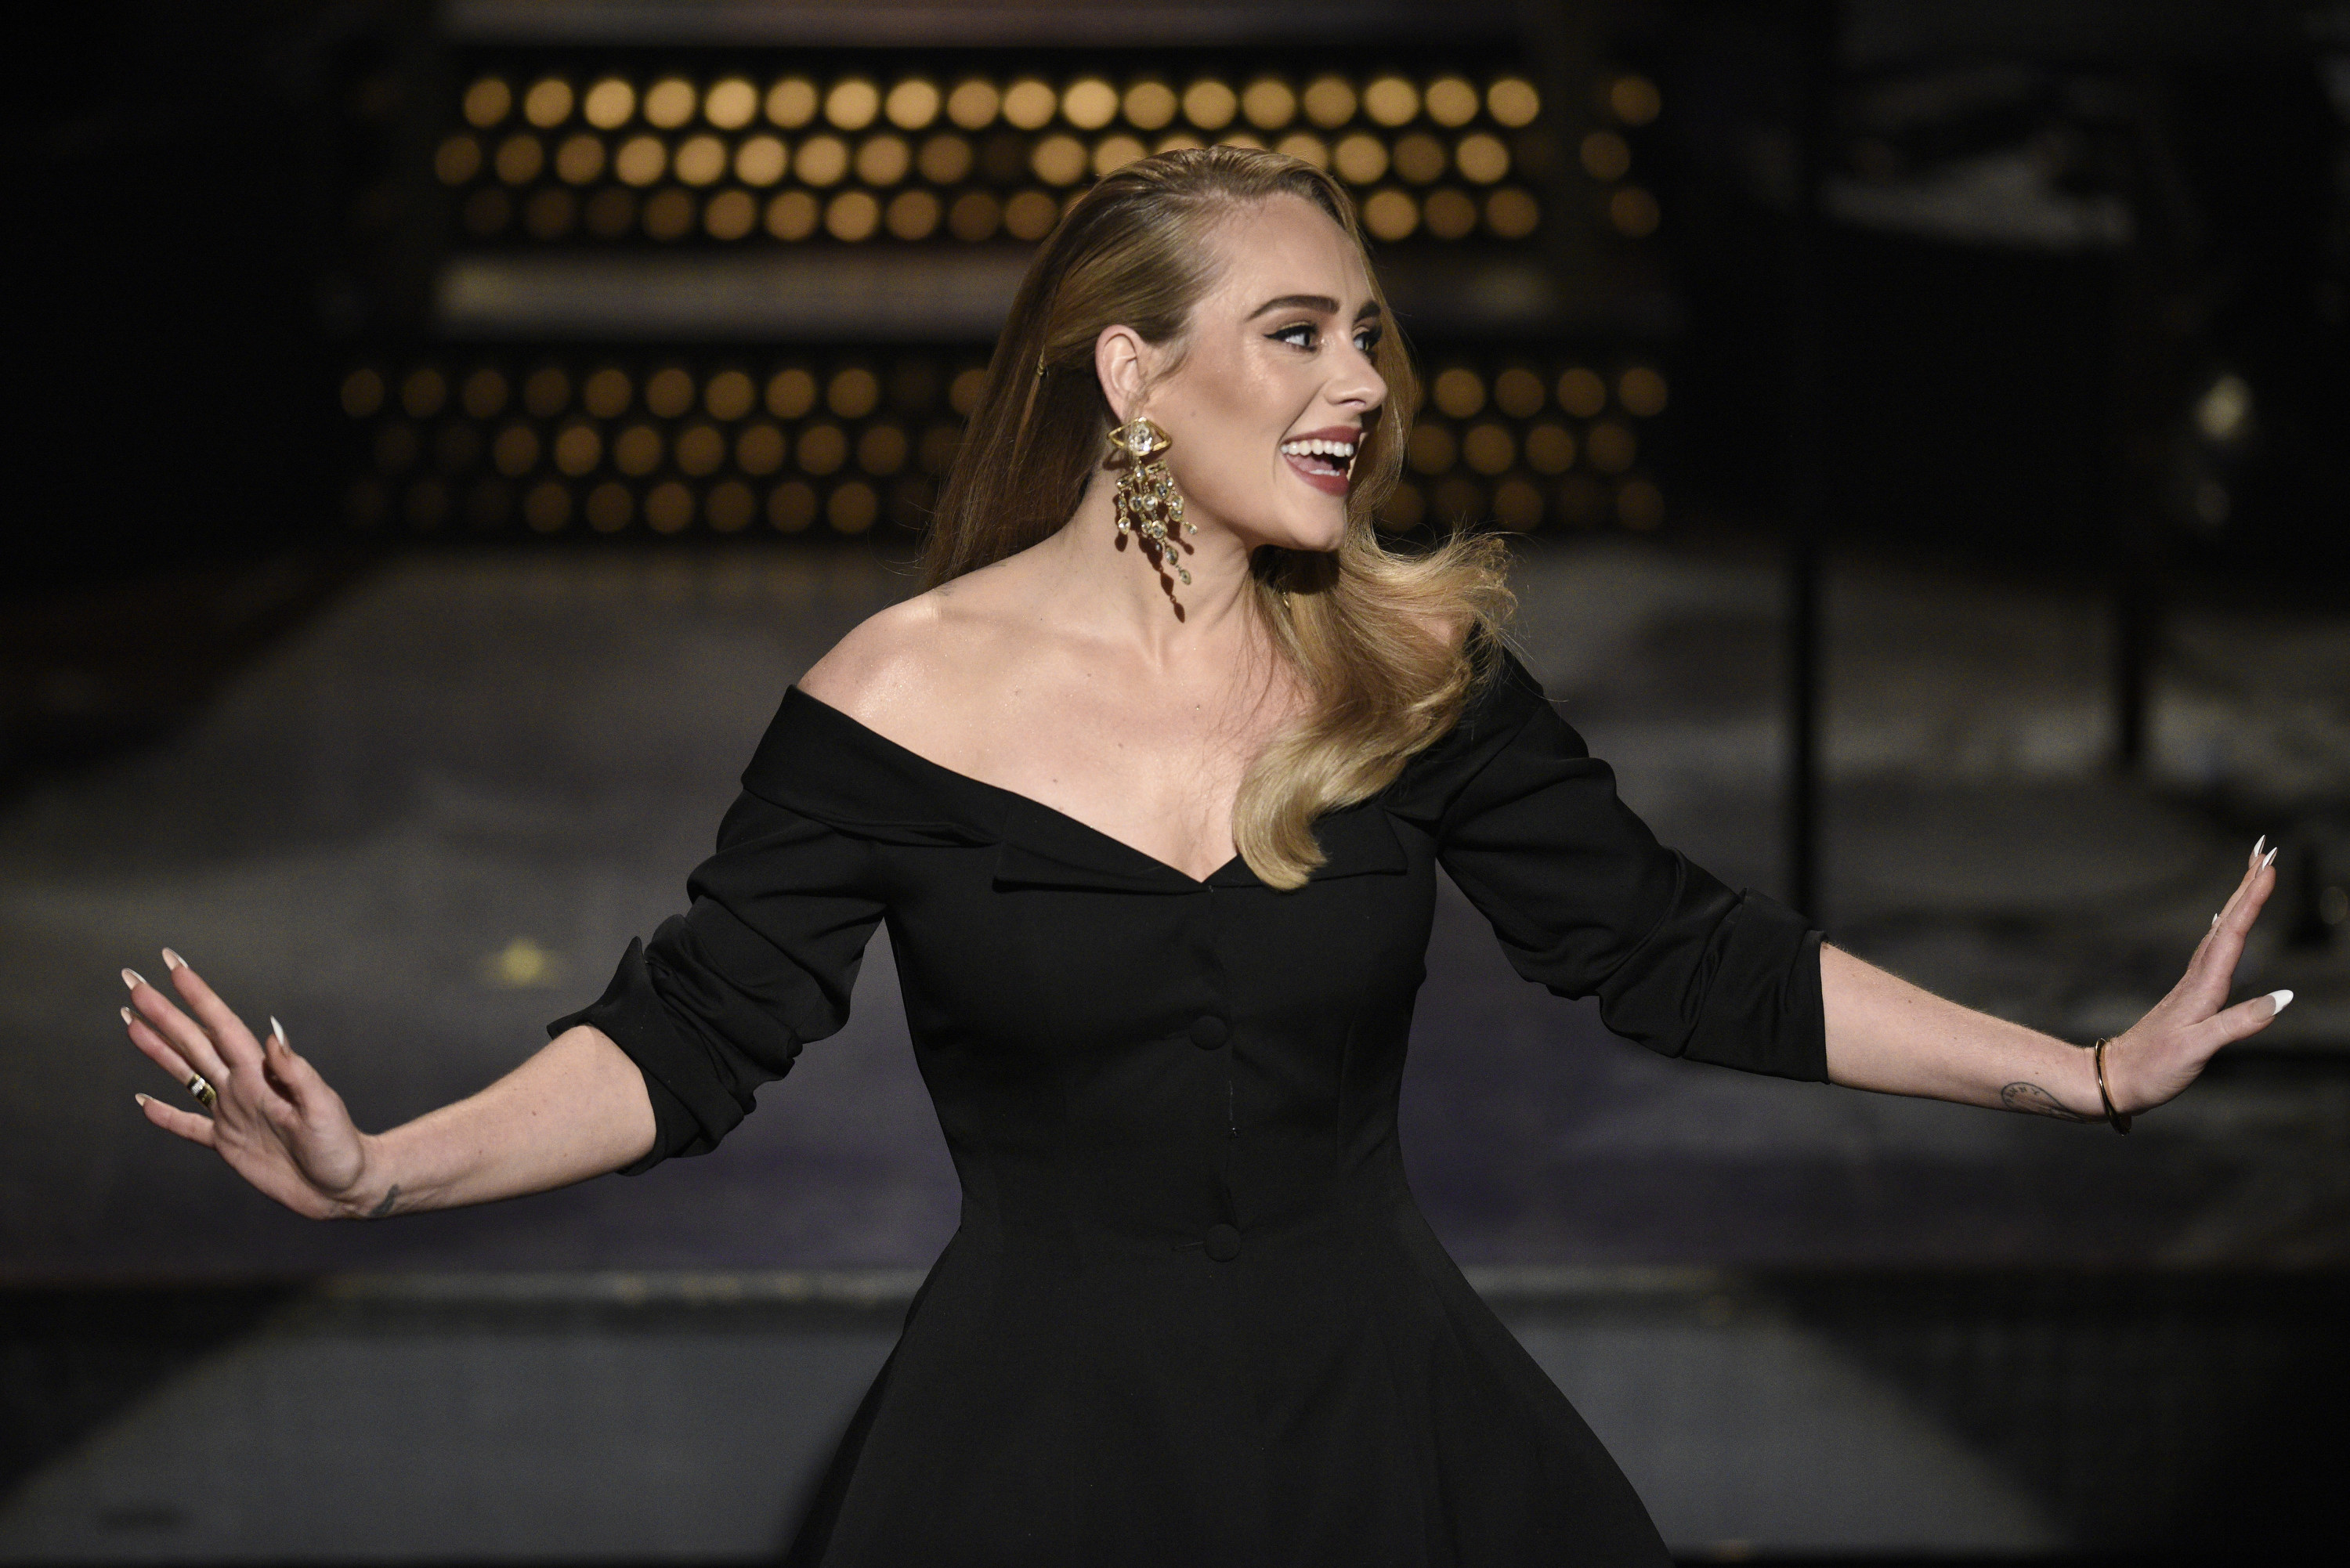 Adele smiles while on stage